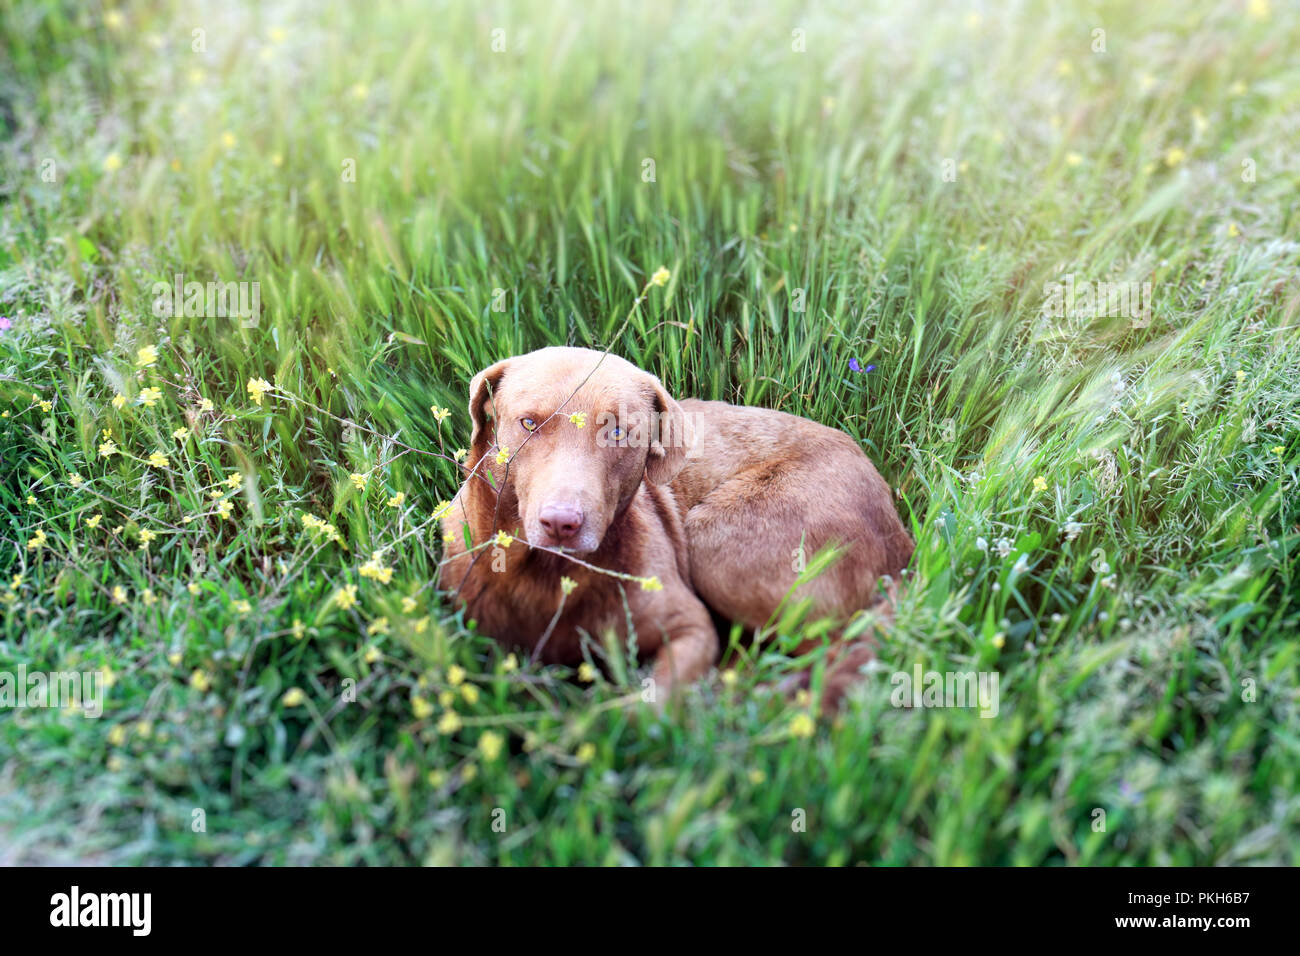 Brown dog lying on the grass with blurred background Stock Photo